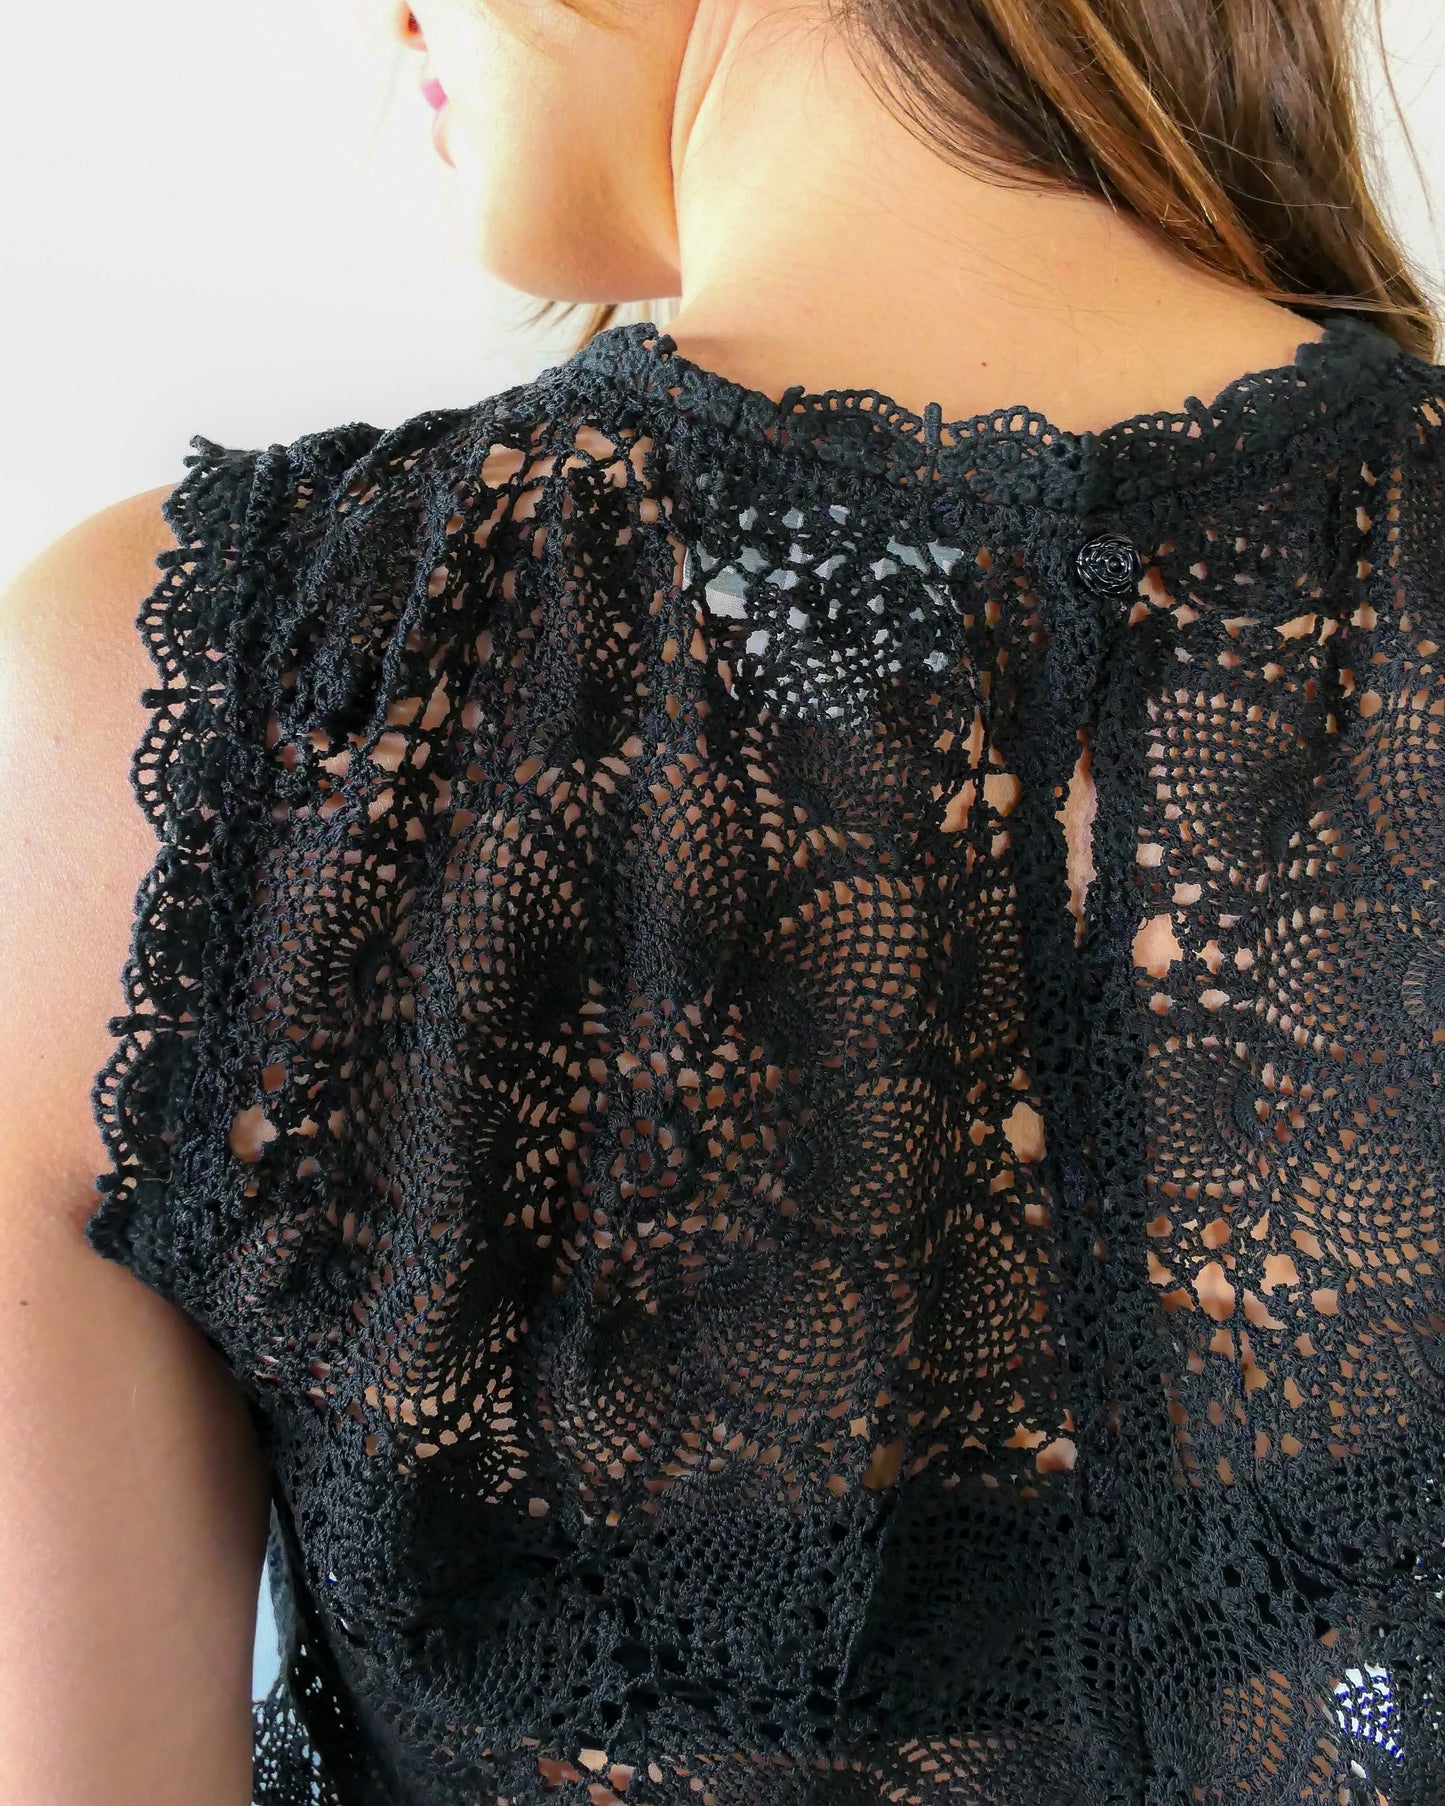 Closeup view of back of top. An ultra casual, hip, and boho-chic crop tank top made with interconnected flower doilies reminiscent of the white lotus, which symbolizes peace, tranquility, and calmness.  Lace trim at the collar and sleeve.  Model is wearing black colored top by Lim's Vintage. 